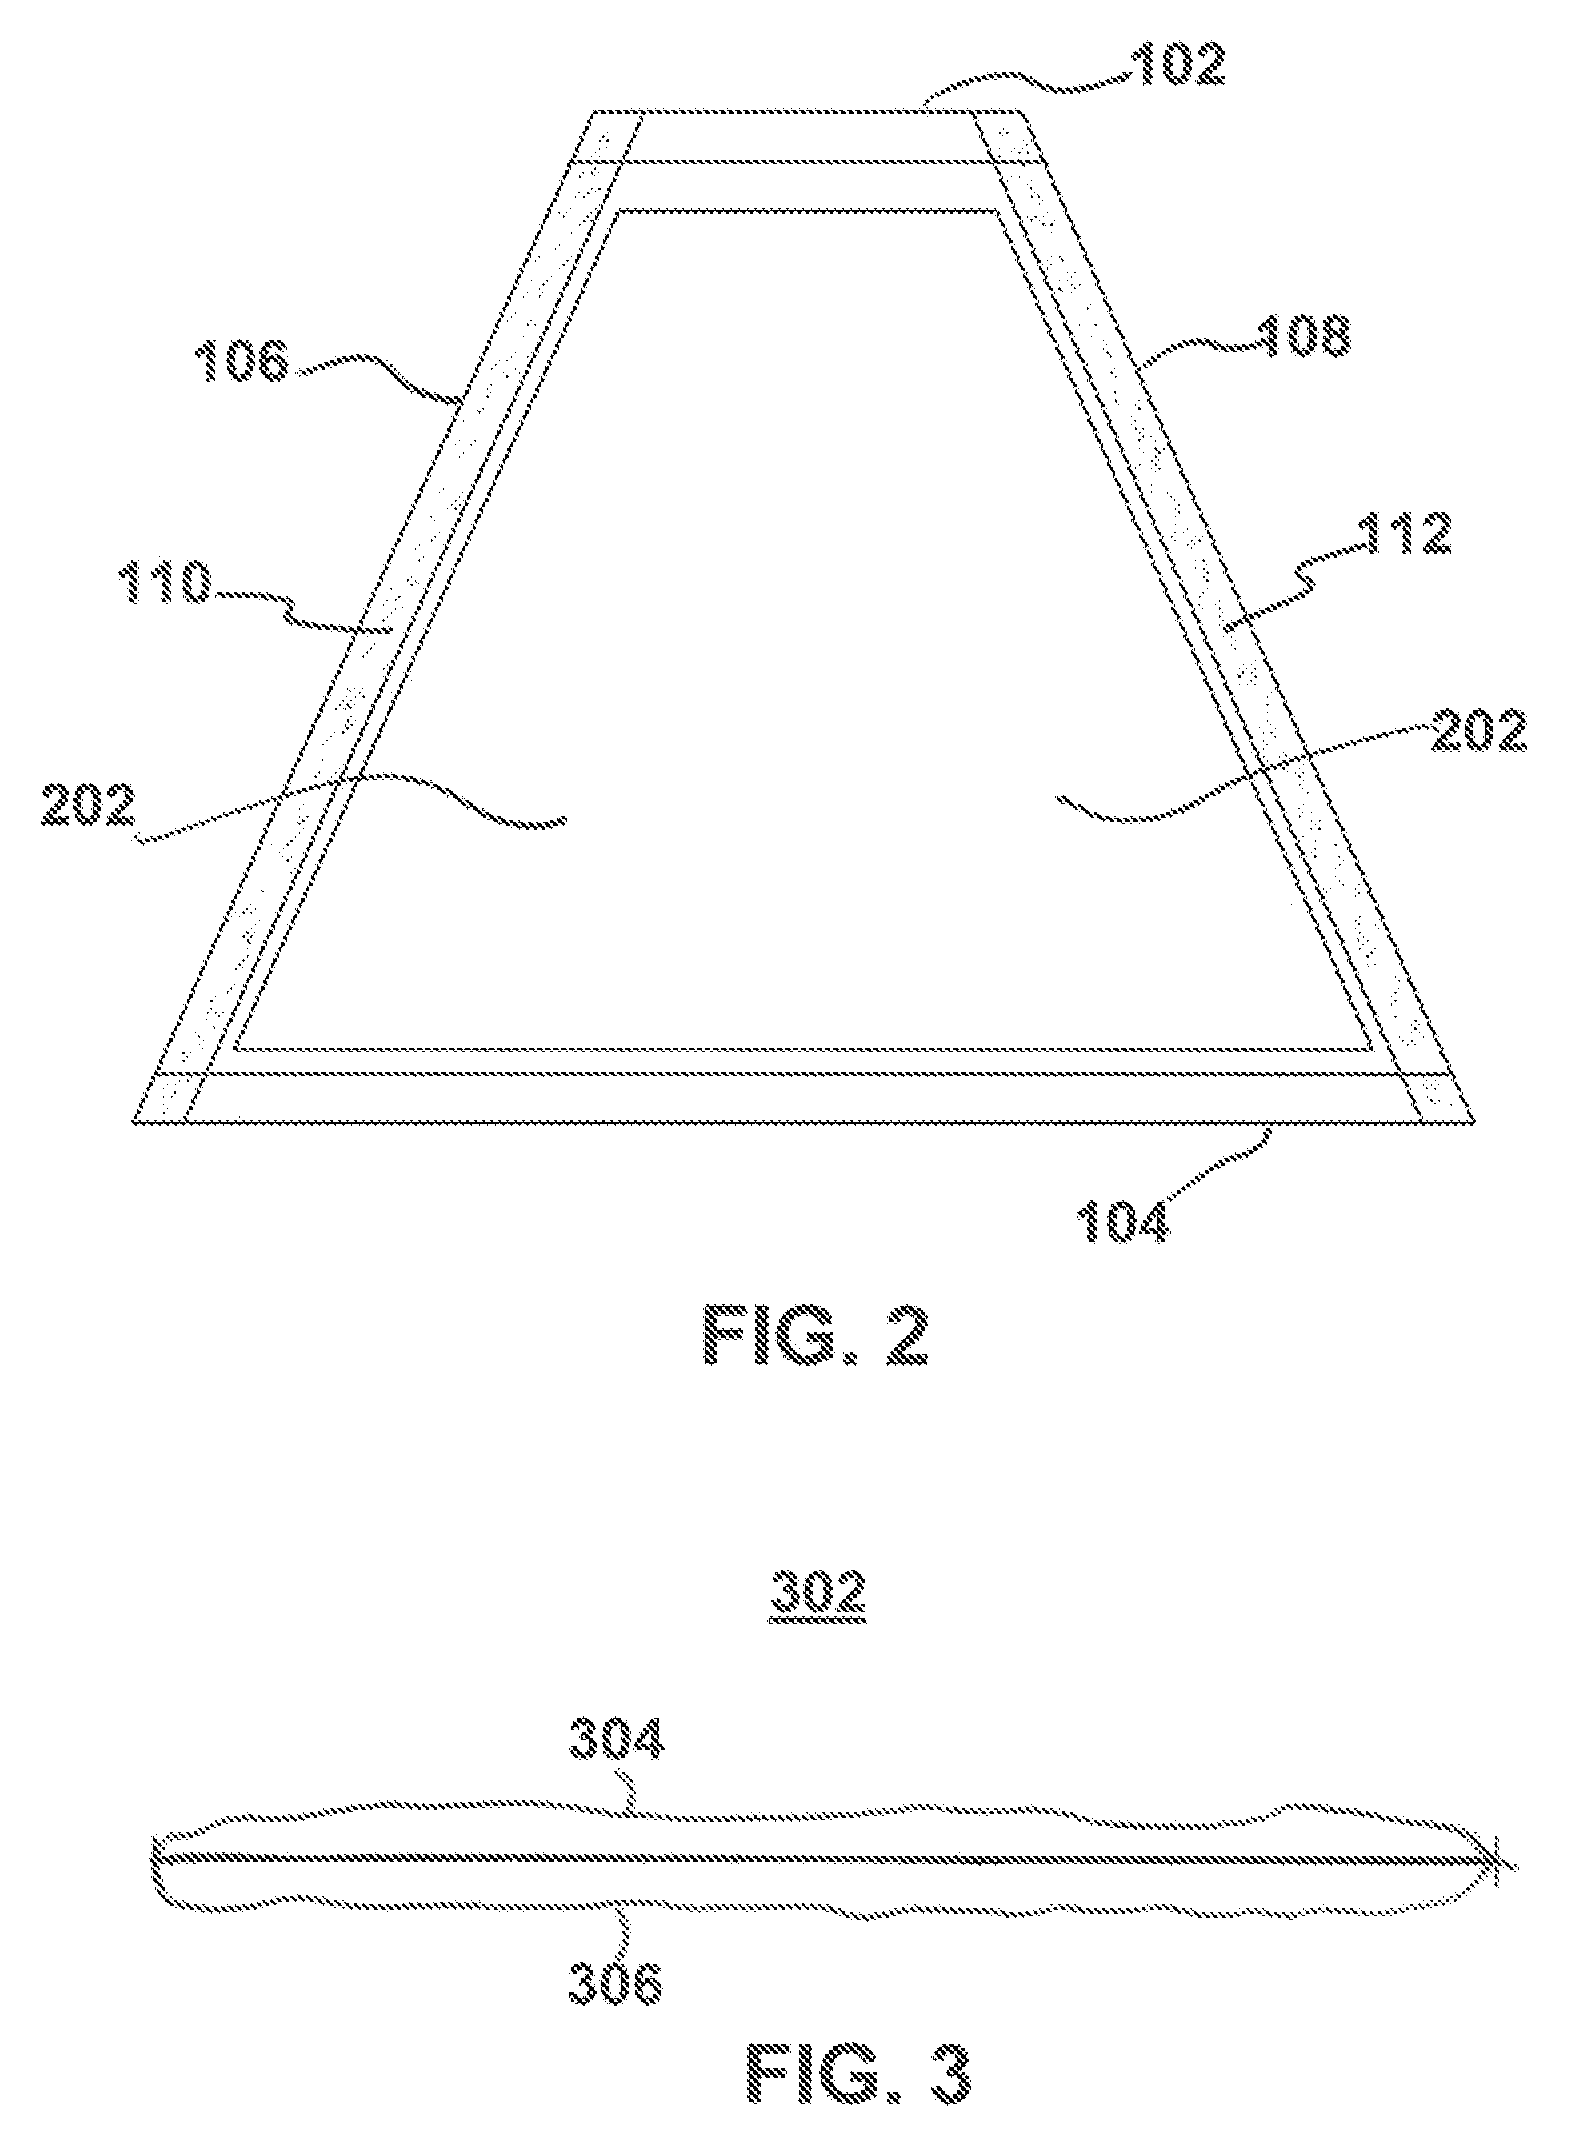 Sound projection device attachable to a user when not in use